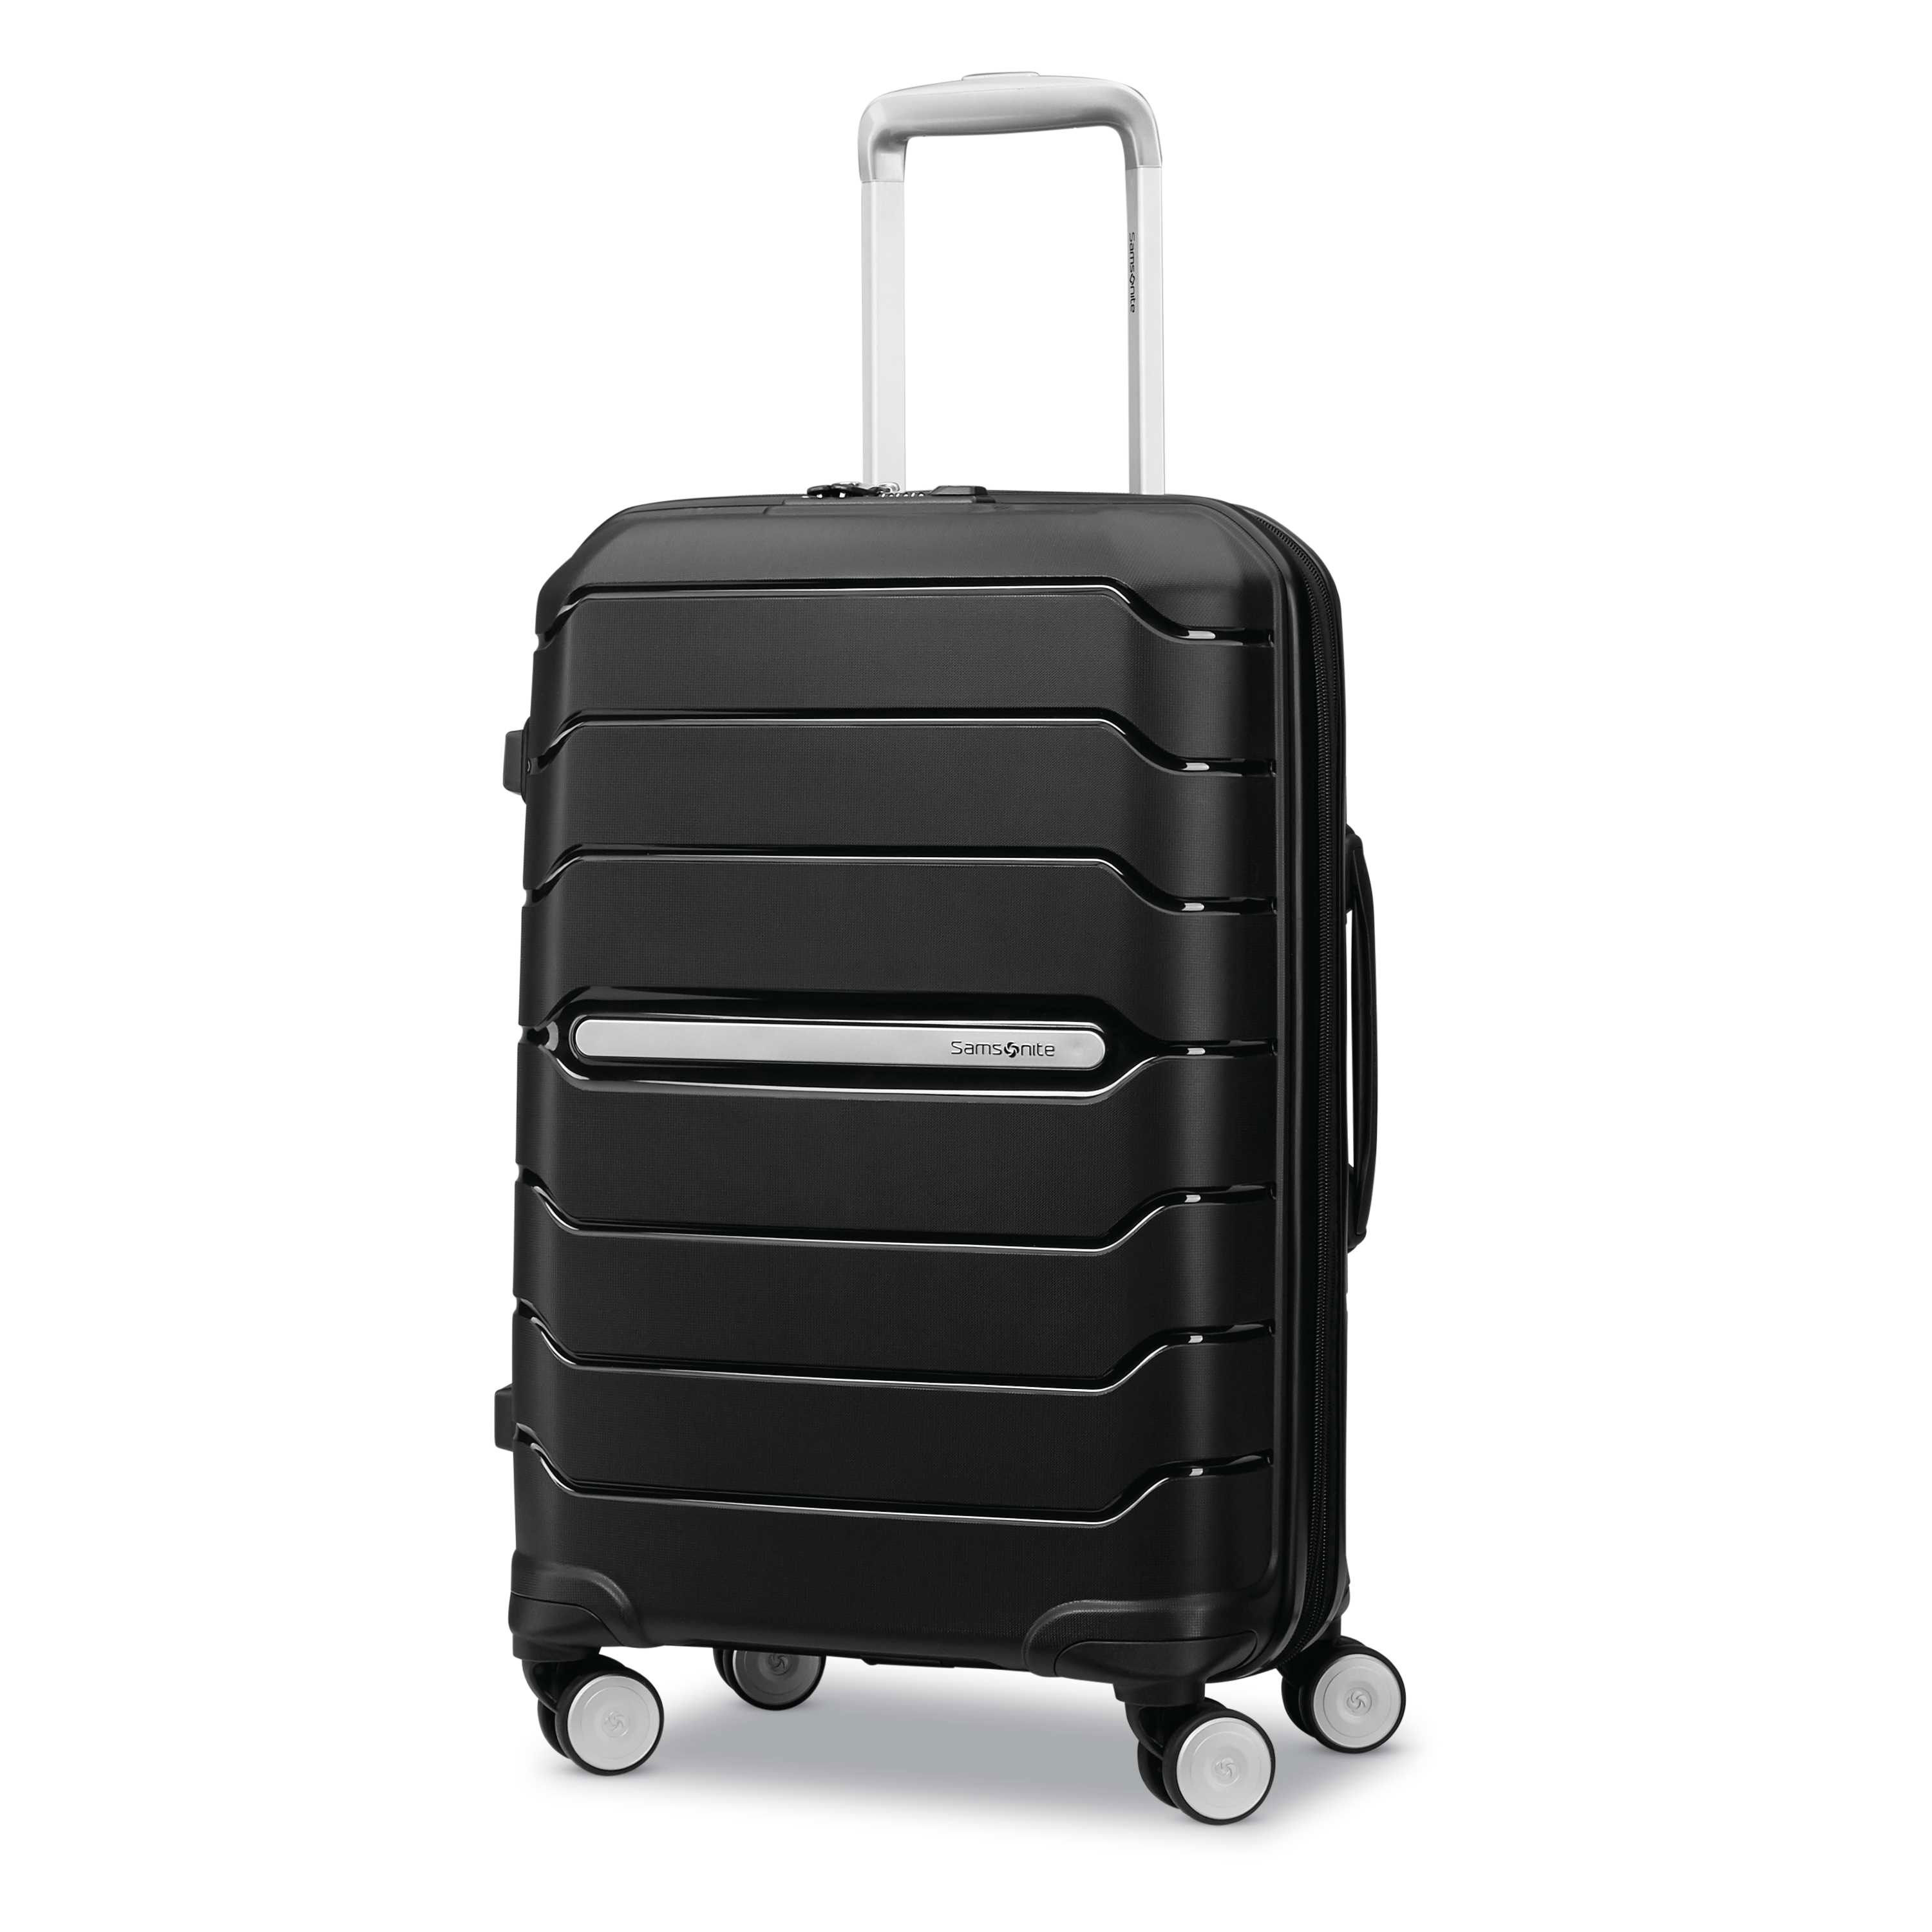 This Samsonite Carryon Is on Sale for Cyber Monday